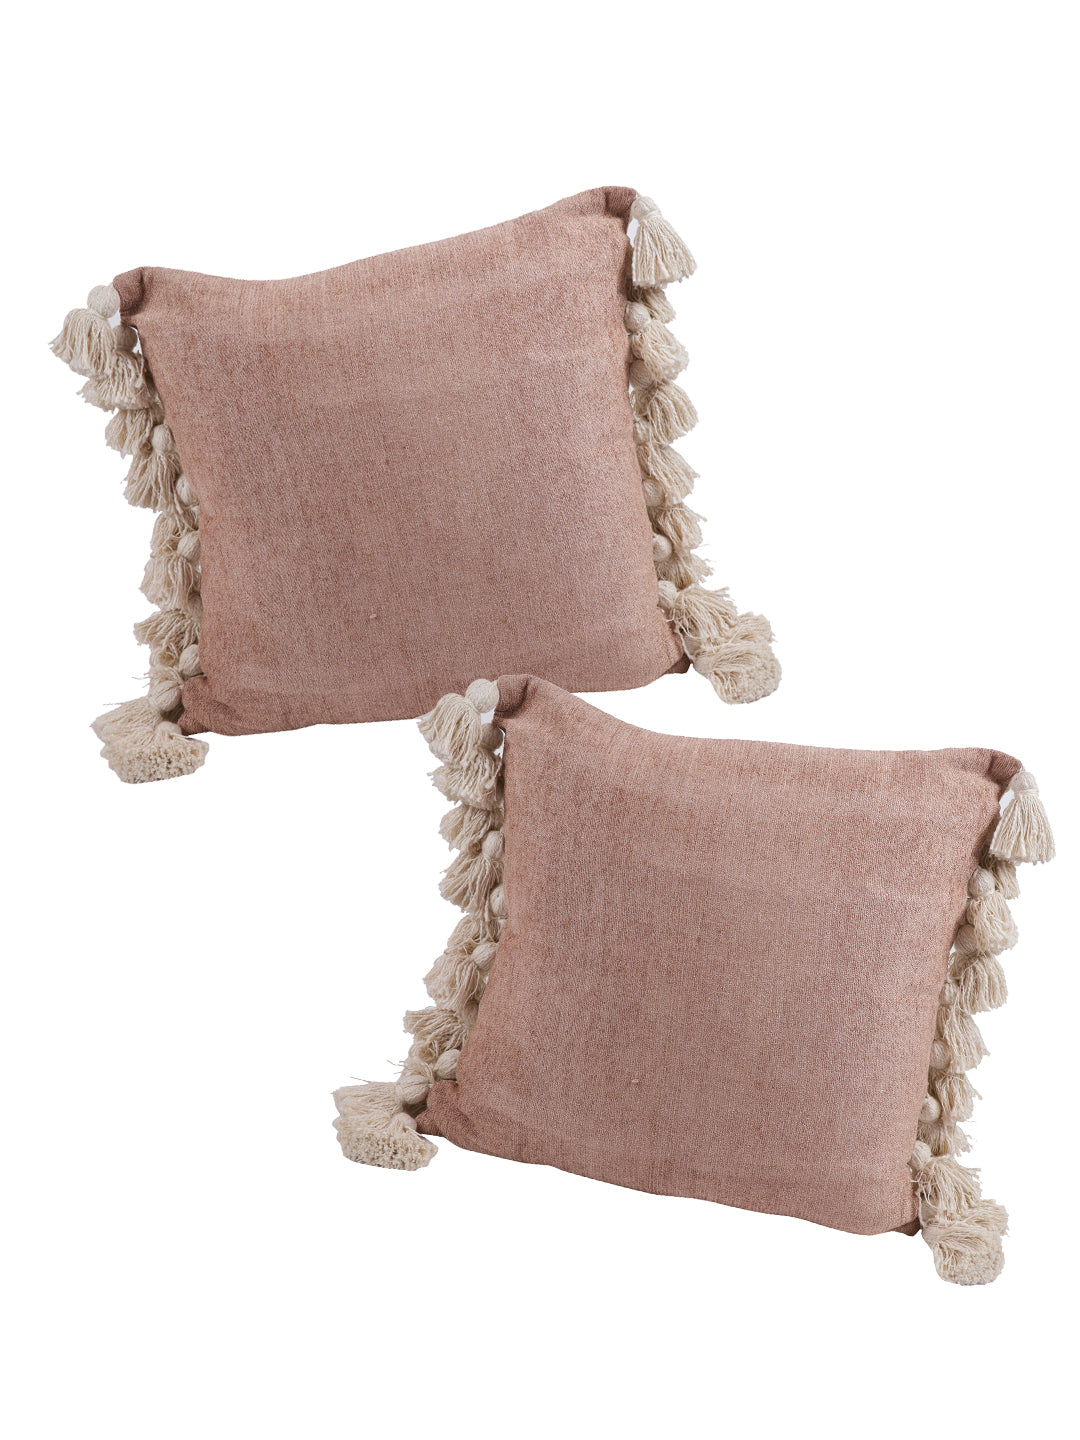 Set of 2 Dusty Pink Color 20X20 Chenille Cushion Cover with Tassels